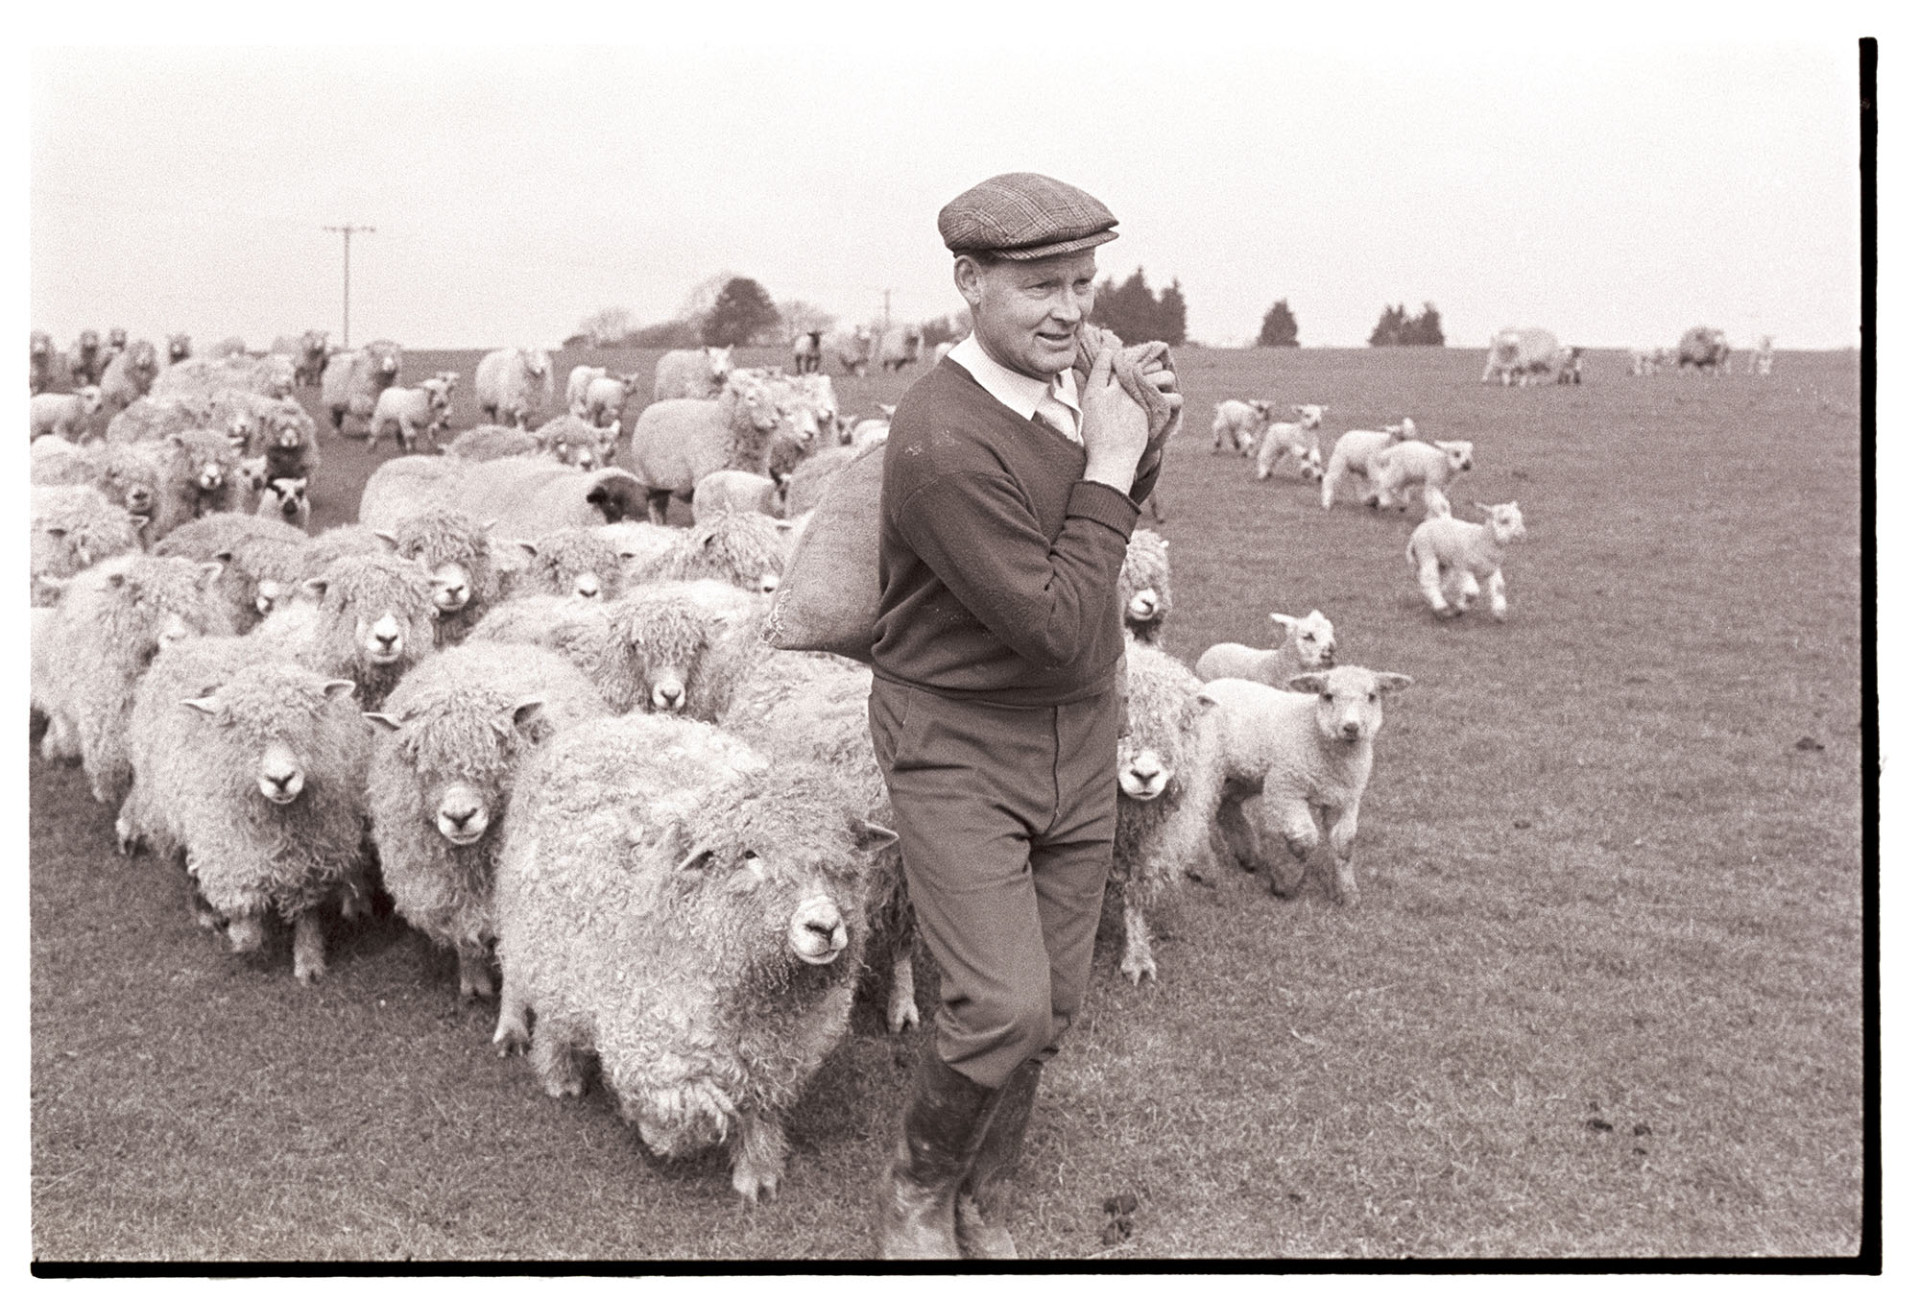 Farmer feeding sheep, leading them to trough.
[A man carrying a sack of feed on his back, leading his sheep and lambs to a feeding trough in a field at Beaford.]